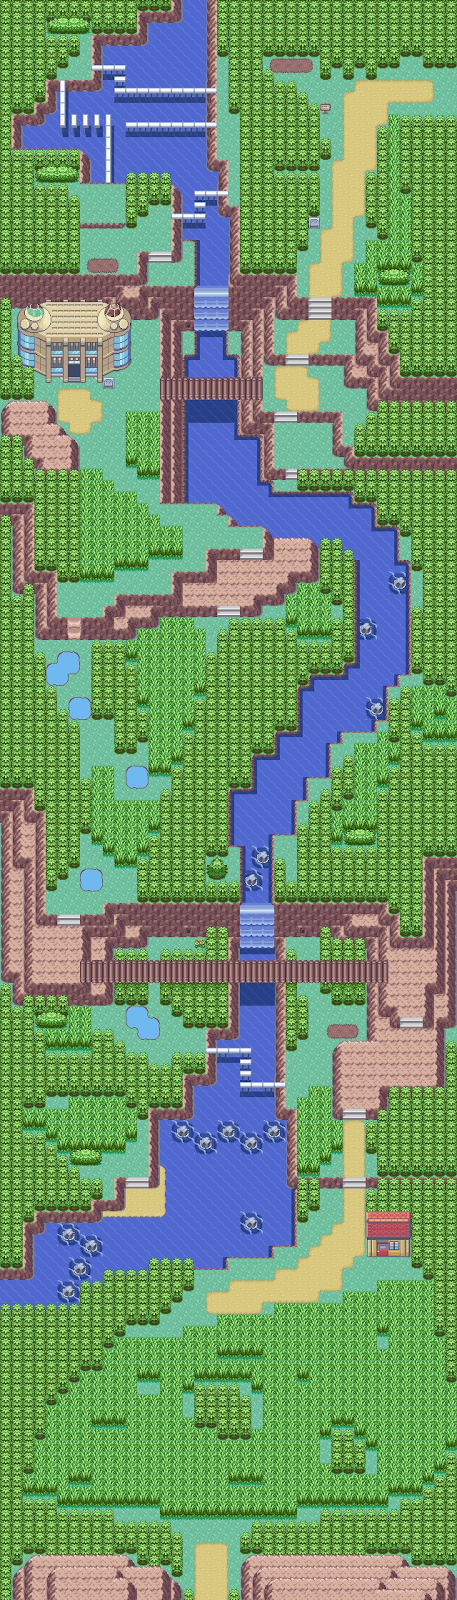 A video game screen with a river and trees

Description automatically generated